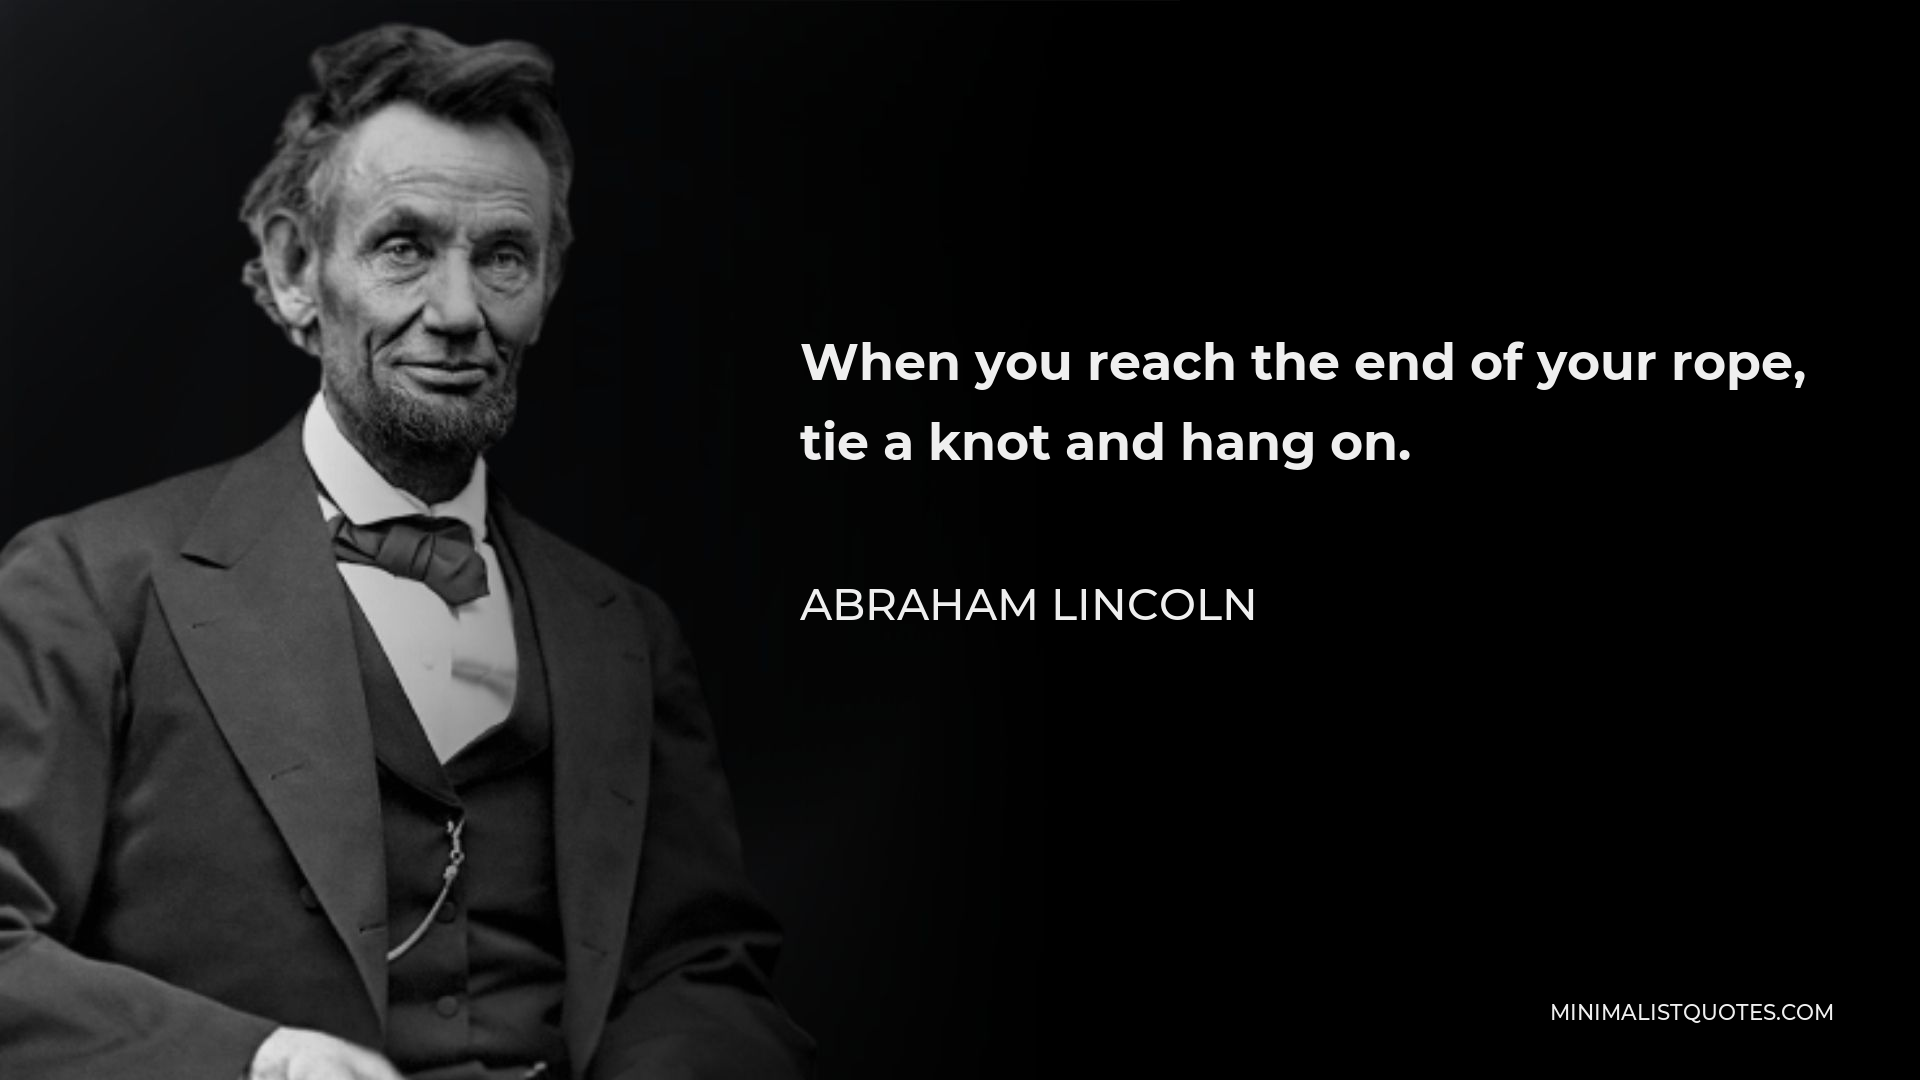 Abraham Lincoln Quote: When you reach the end of your rope, tie a knot ...